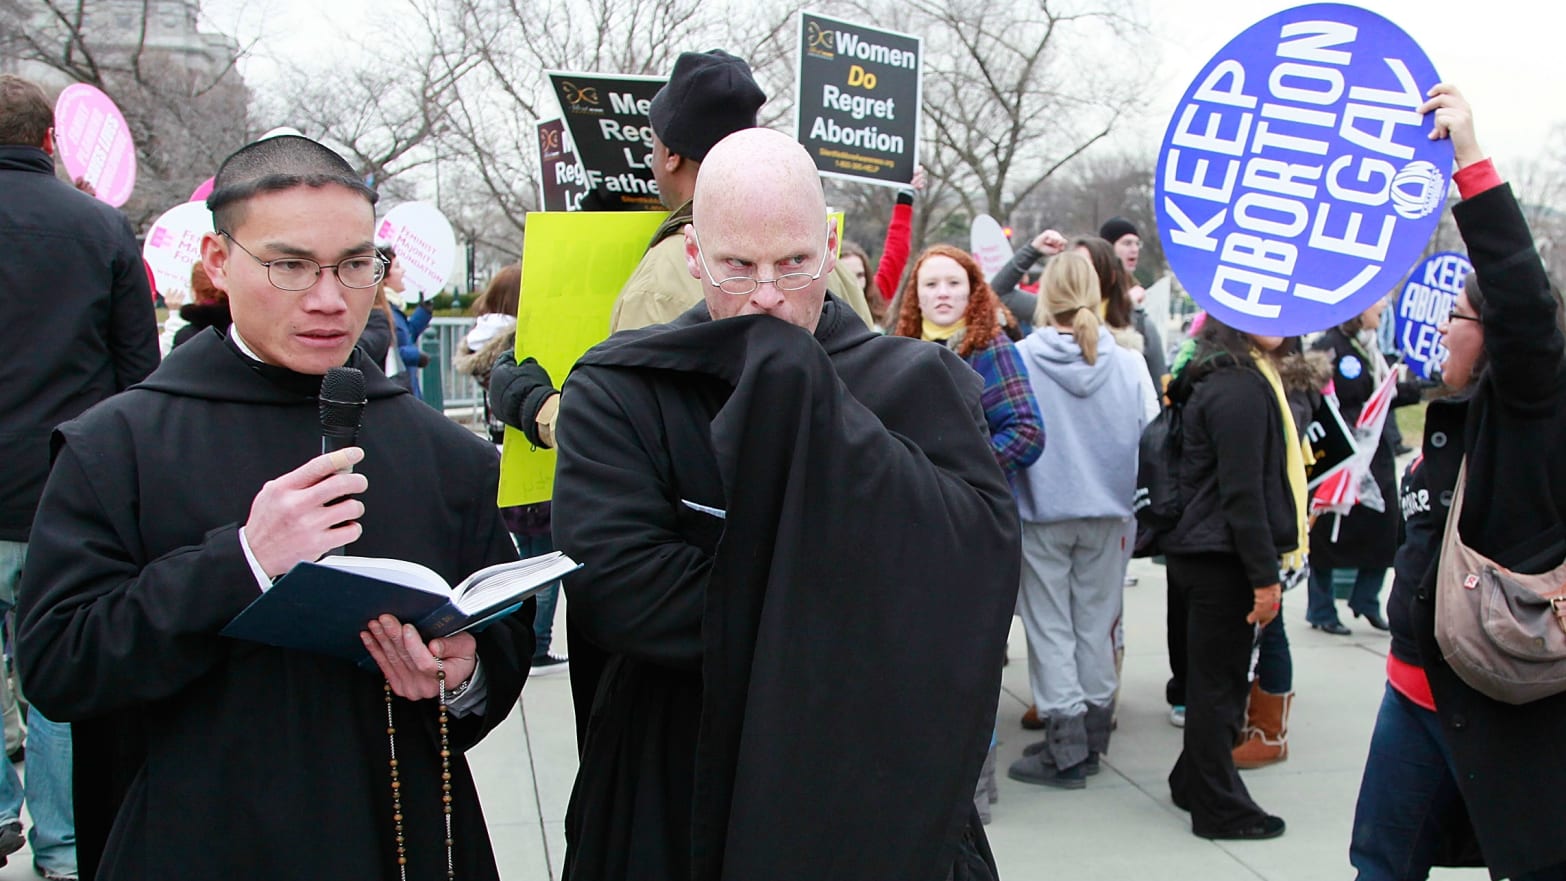 Father Gabriel (L) and Brother Bernard (2nd-L) of Our Lady of Guadalupe Monastery in New Mexico, participate in a prayer while Pro-choice advocates protest nearby.